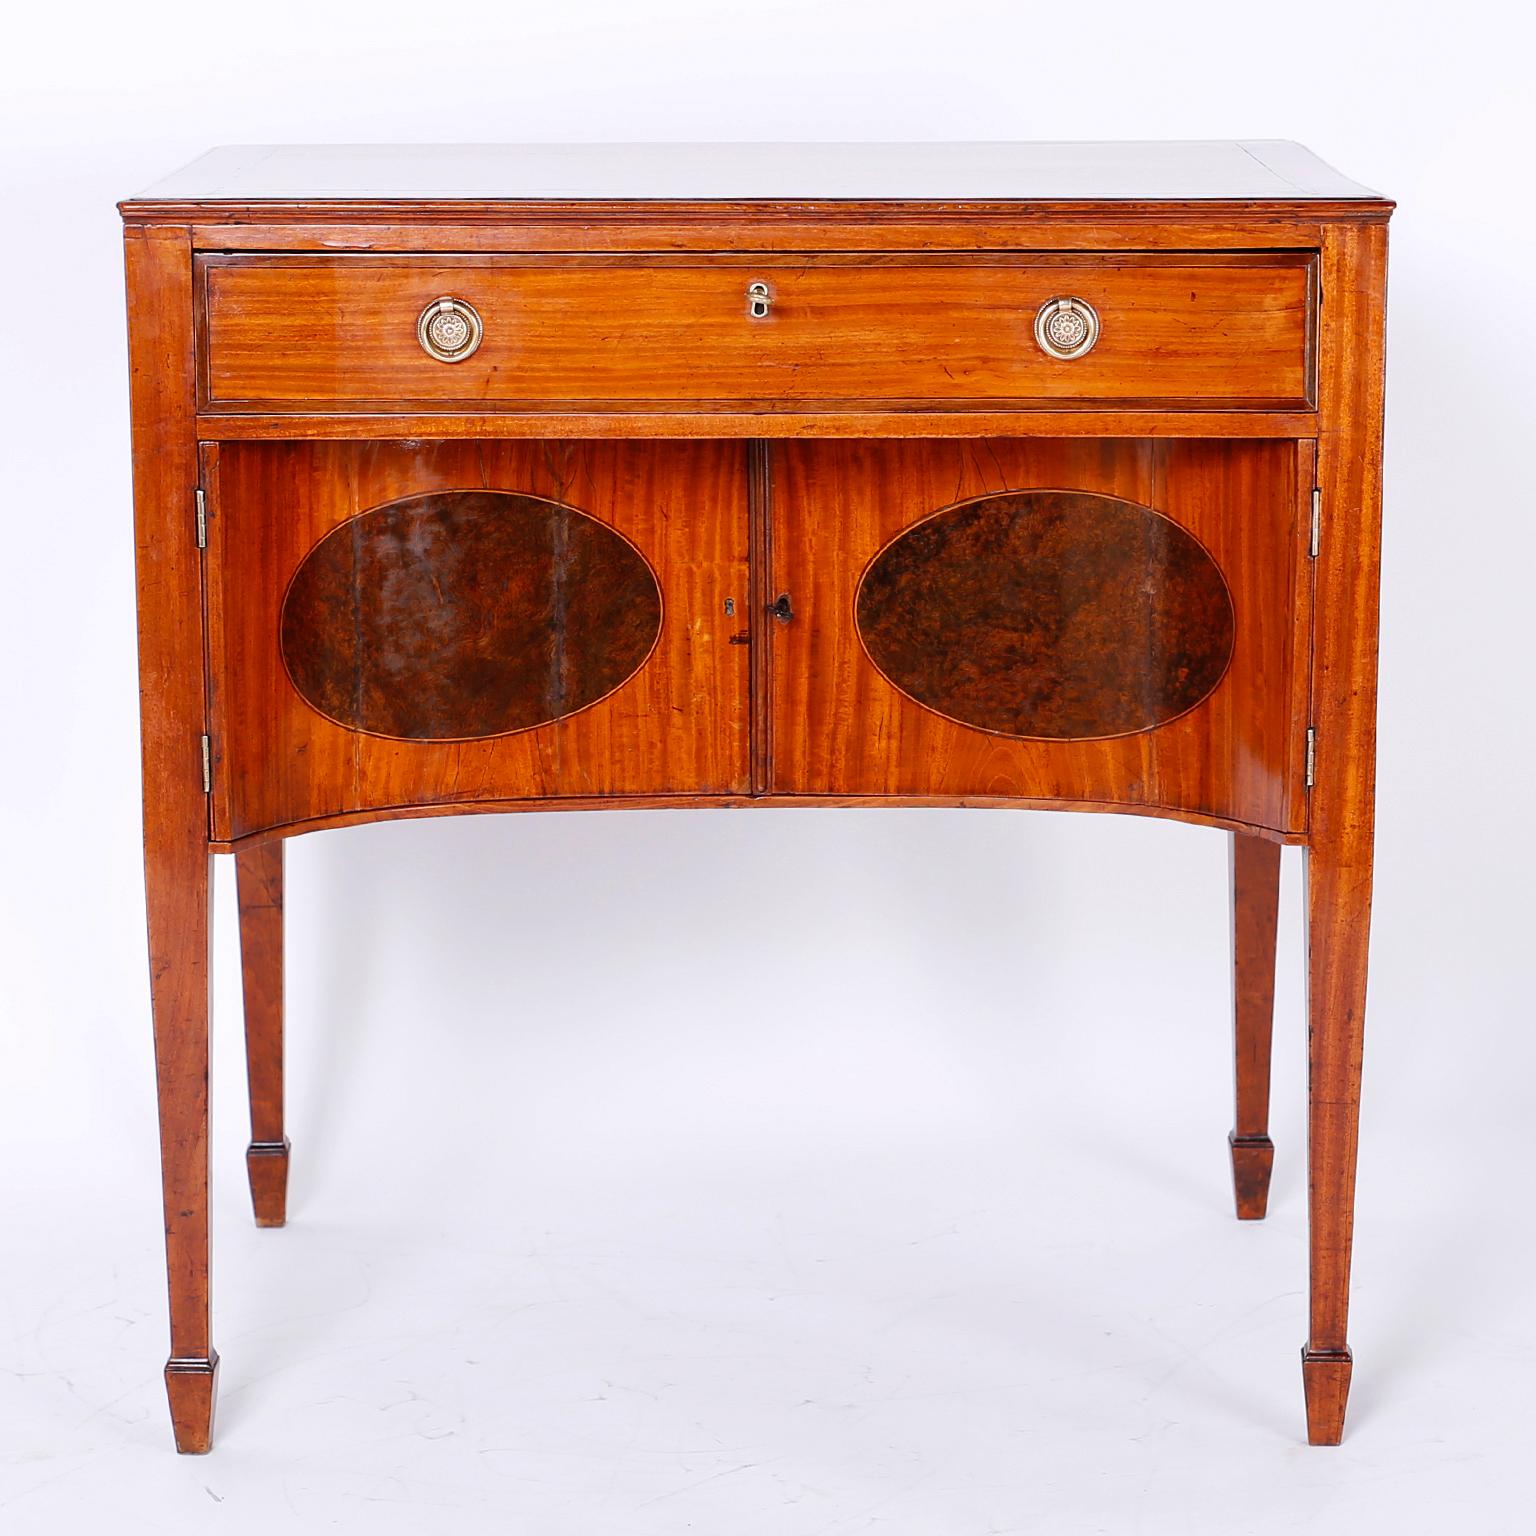 George 111 style dressing table featuring satinwood panels on the top, drawer front and doors which are highlighted with oval burl wood inlays.